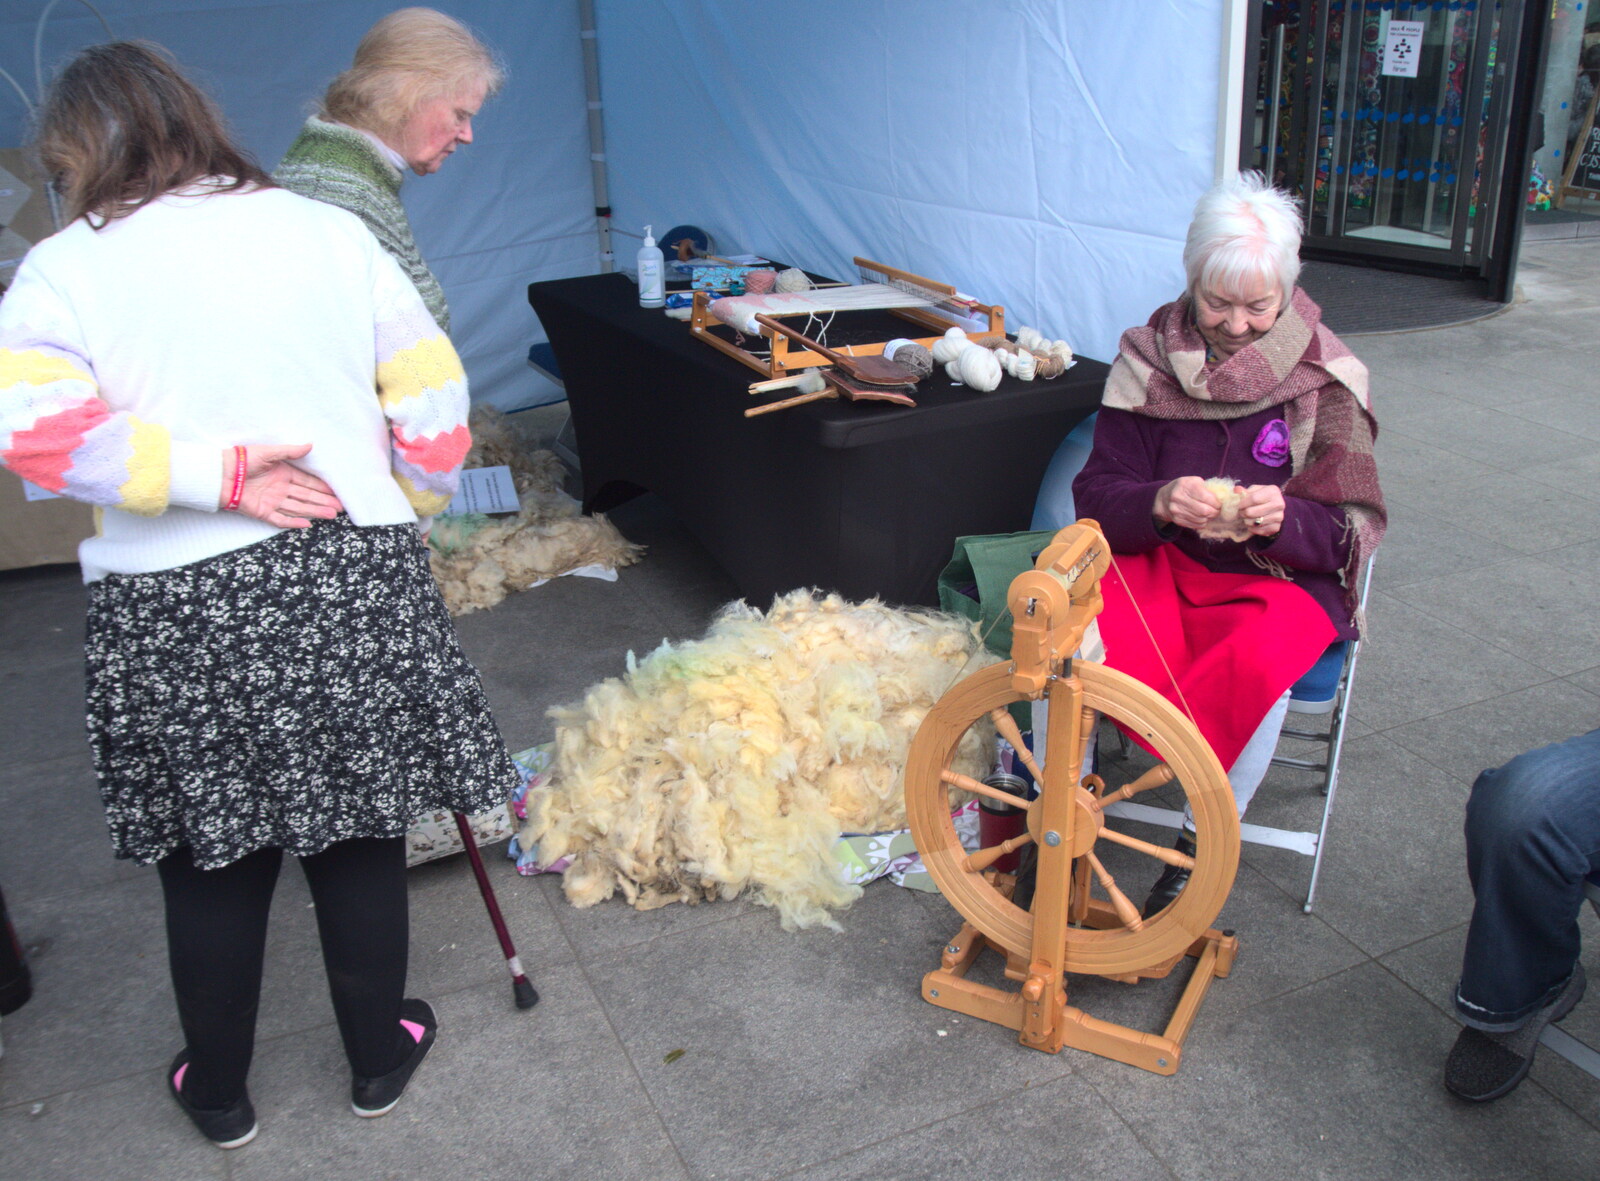 Someone makes yarn from sheeps' wool from It's a Stitch Up: A Trip to Norwich, Norfolk - 18th March 2023